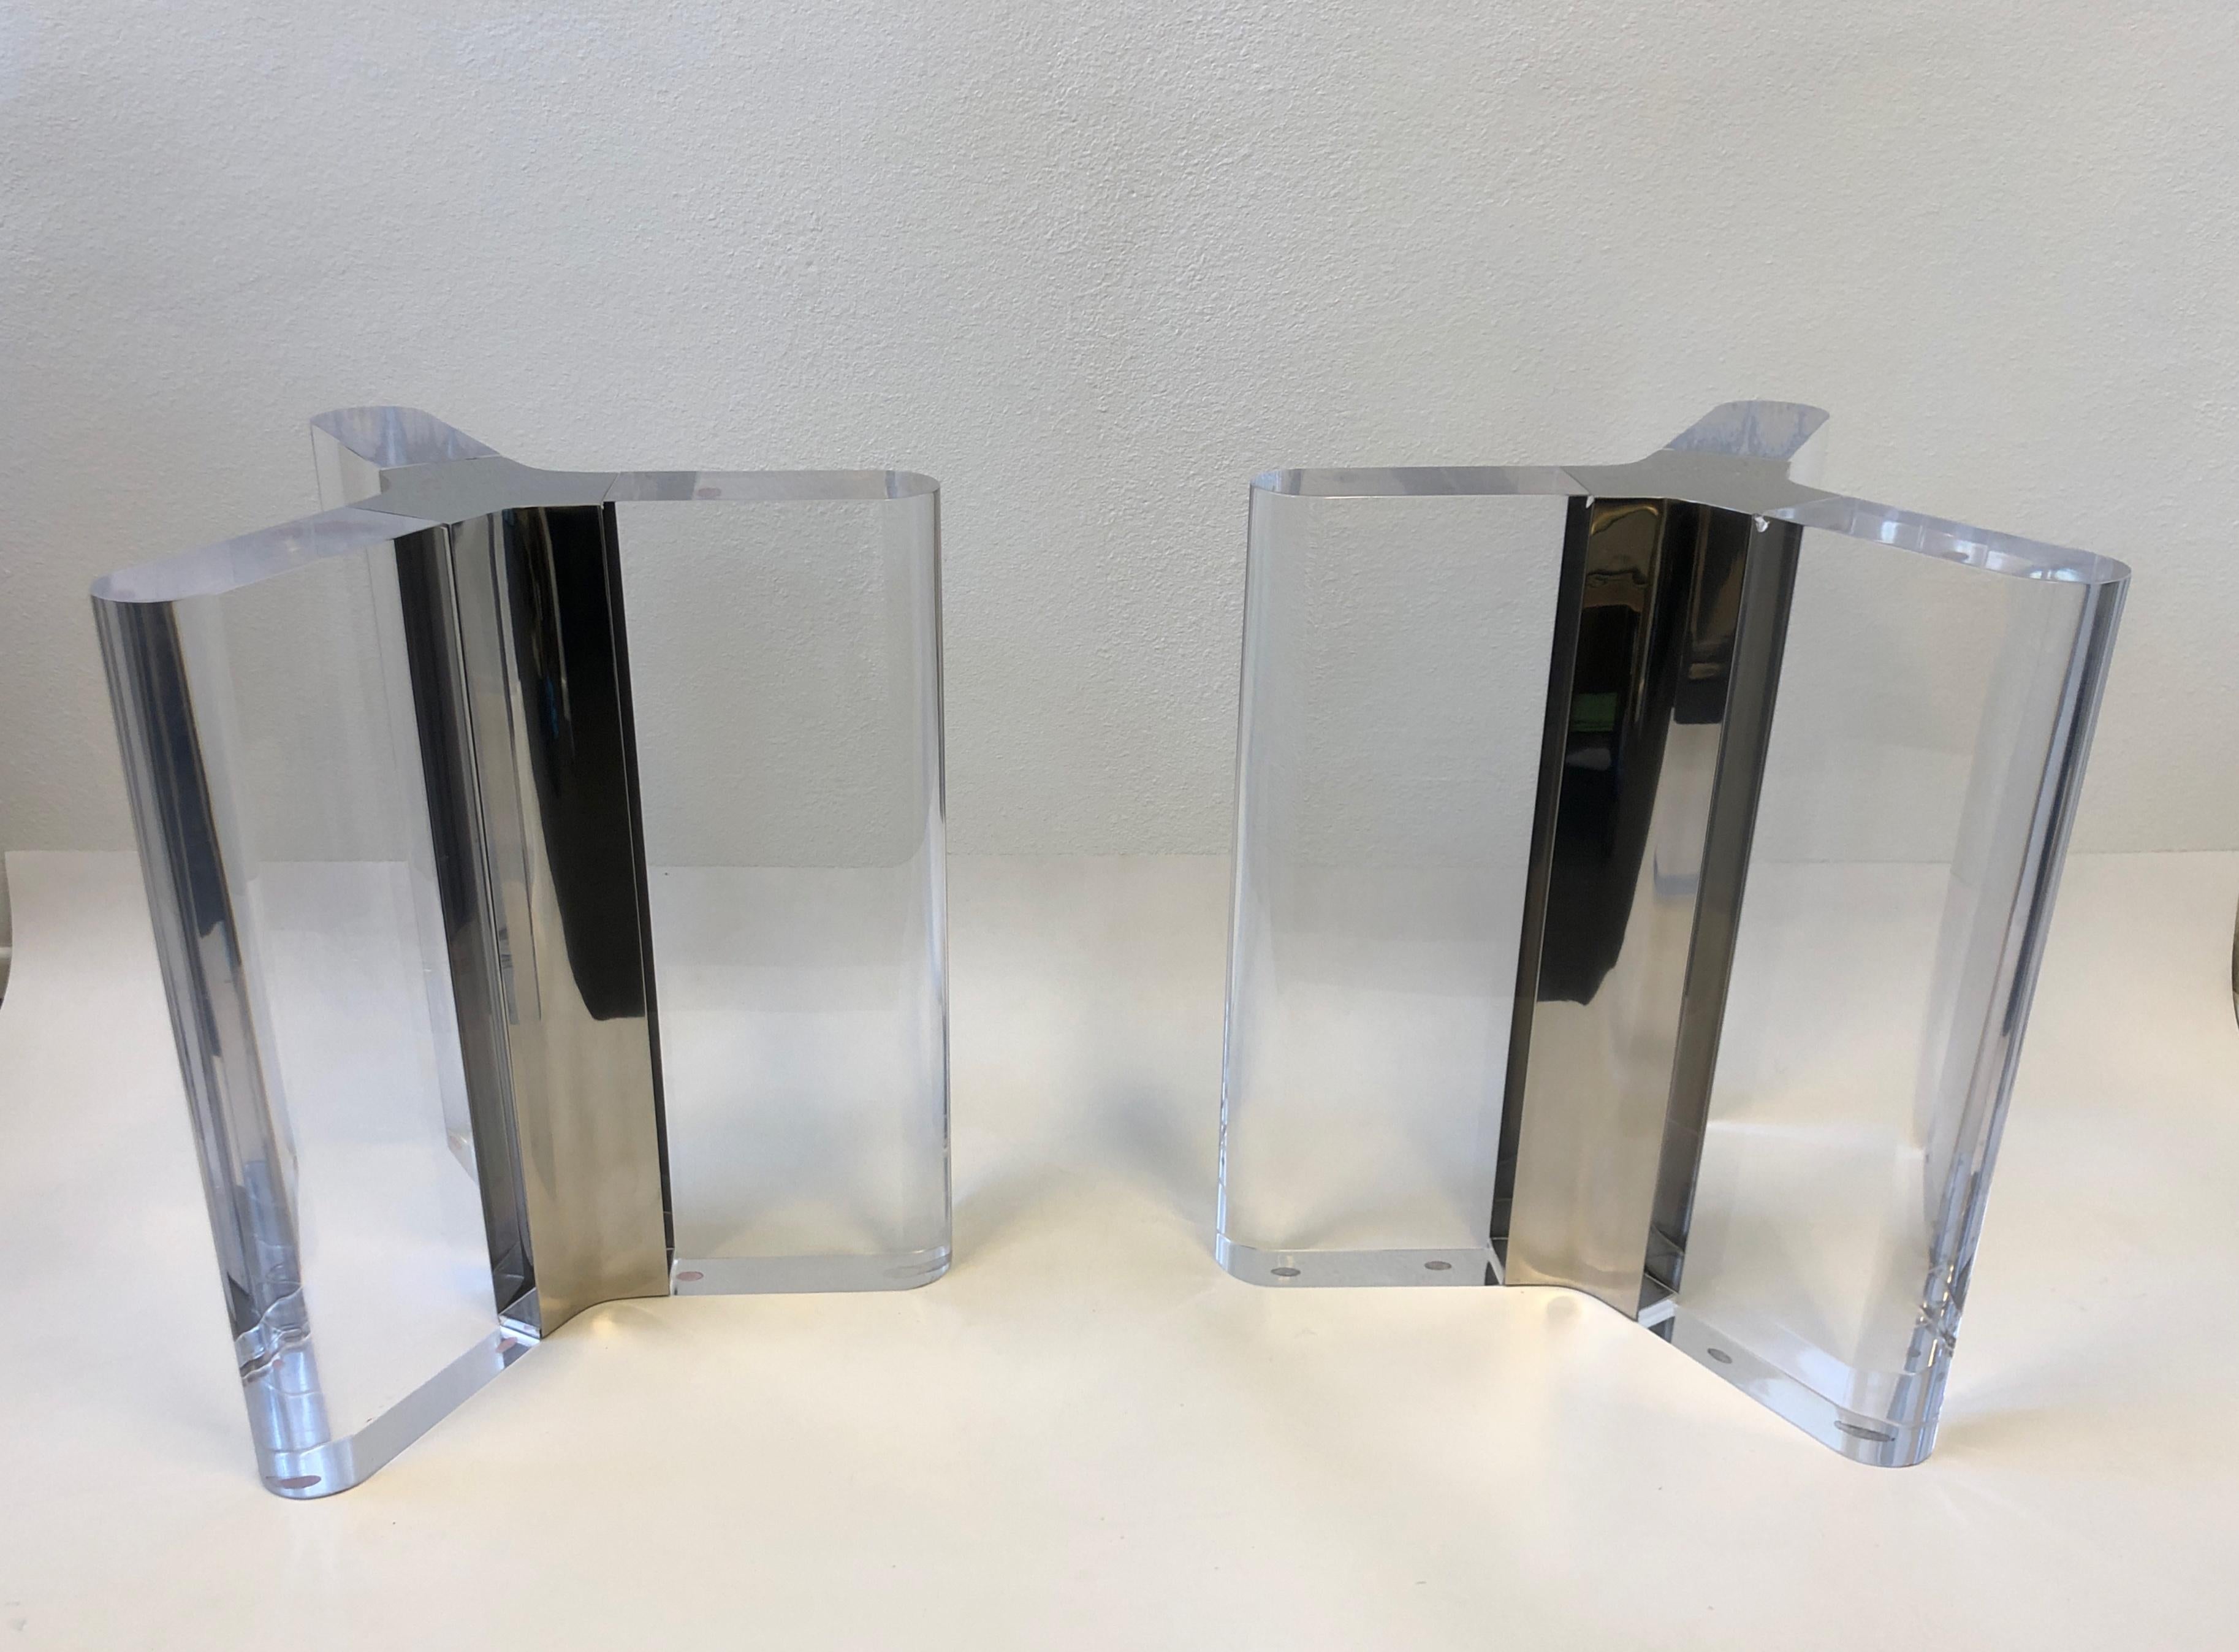 Pair of rare custom made clear lucite and polish stainless steel dining table bases. Design by renowned American designer Charles Hollis Jone (Mr Lucite). Newly professionally polished. The lucite is 4” thick, One of the bases has some inclusions